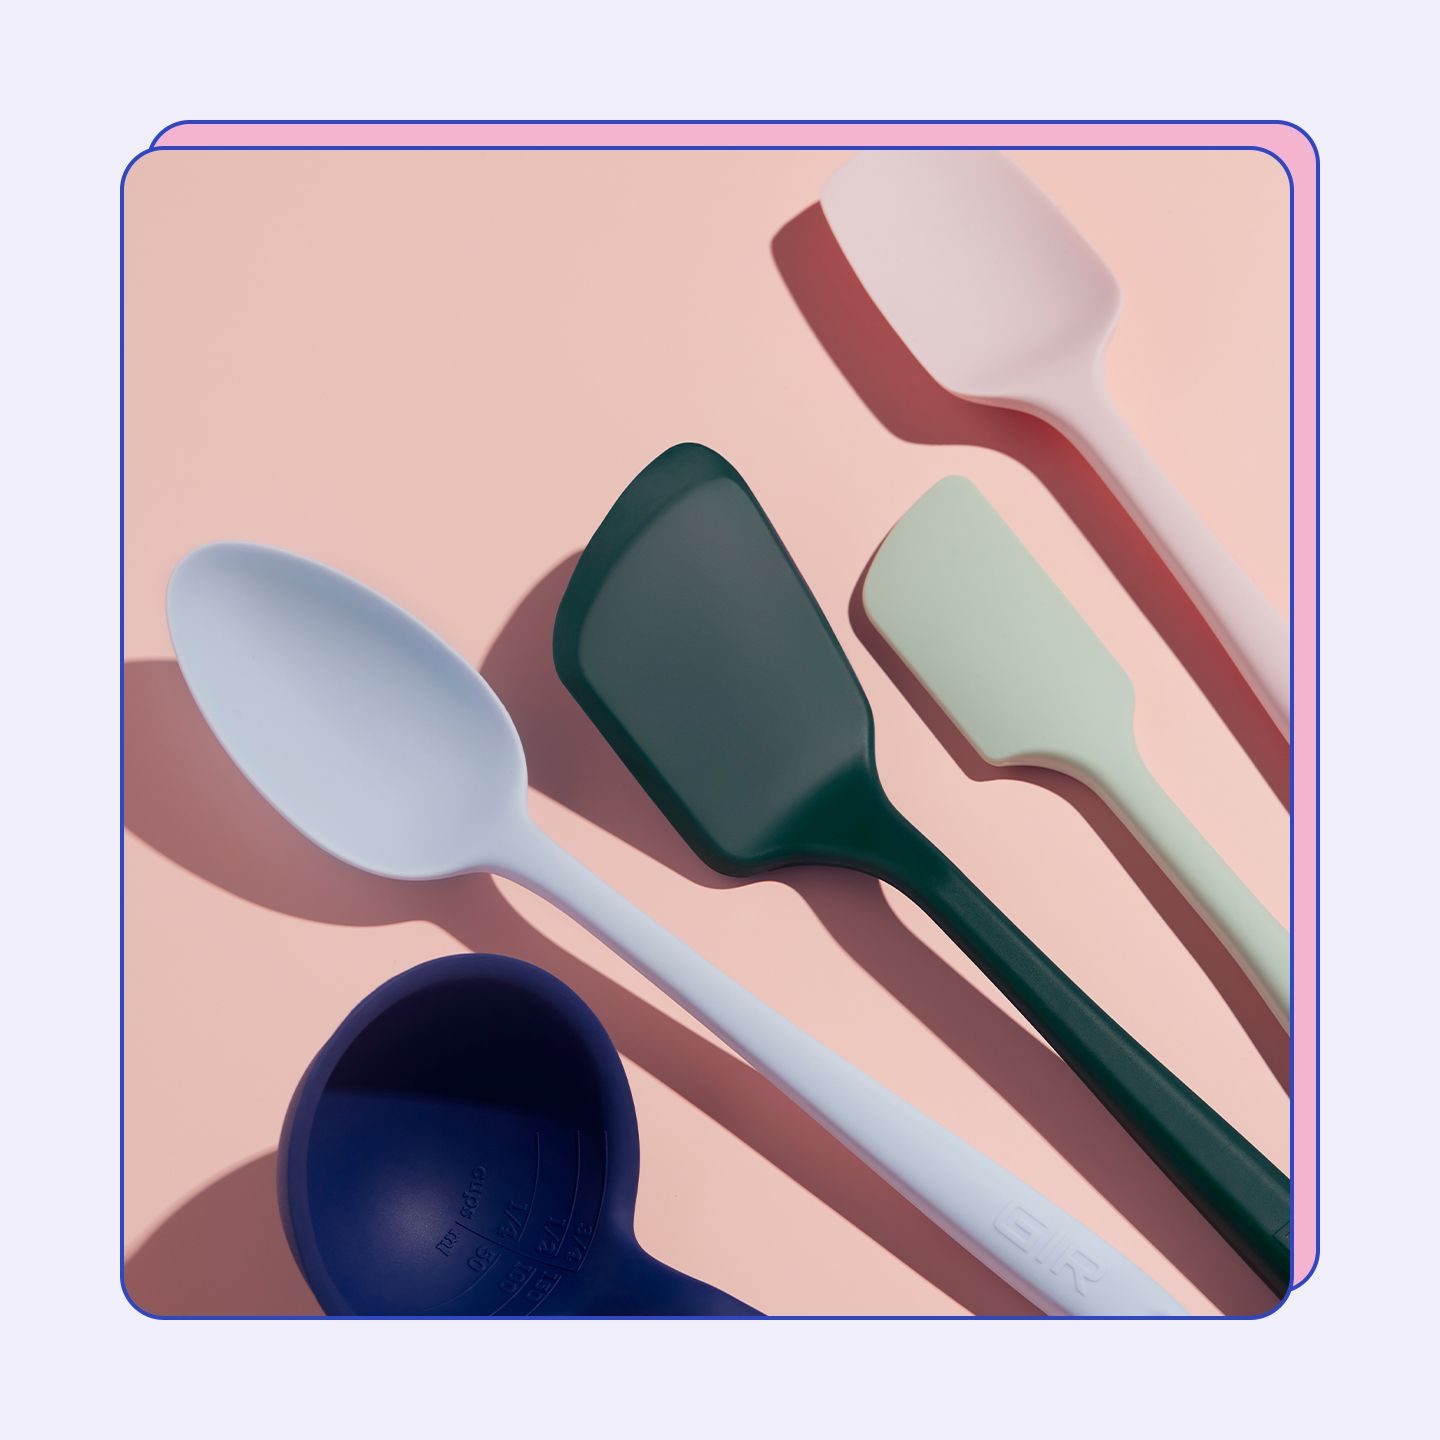 A mixed color 5-piece tool set on a pink background.